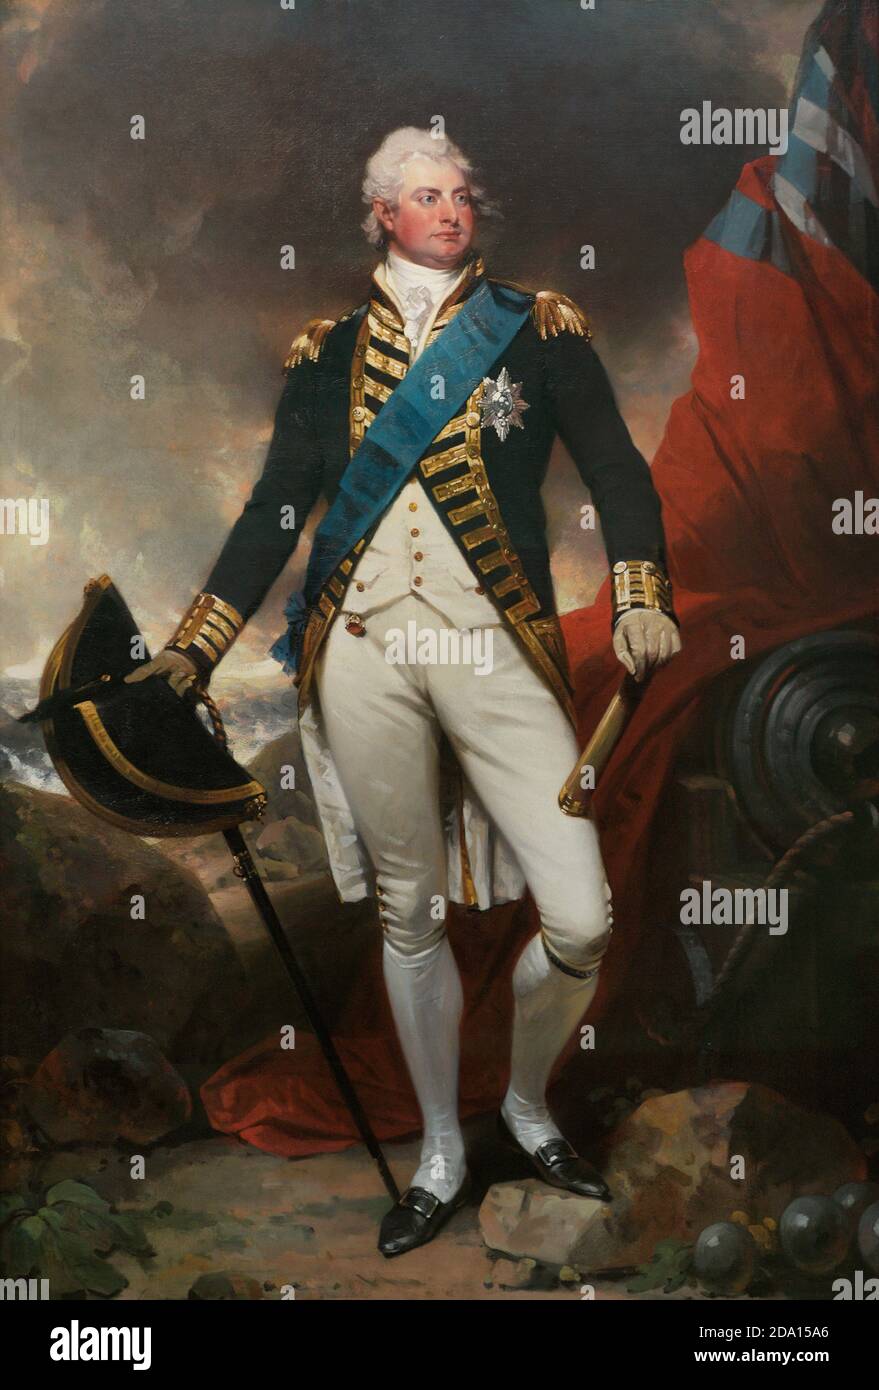 King William IV (1765-1837). King of the United Kingdom (1830-1837). William IV depicted in the full-dress uniform of an admiral. Portrait by Sir Martin Archer Shee (1769-1850). Oil on canvas, c. 1800. National Portrait Gallery. London, England, United Kingdom. Stock Photo